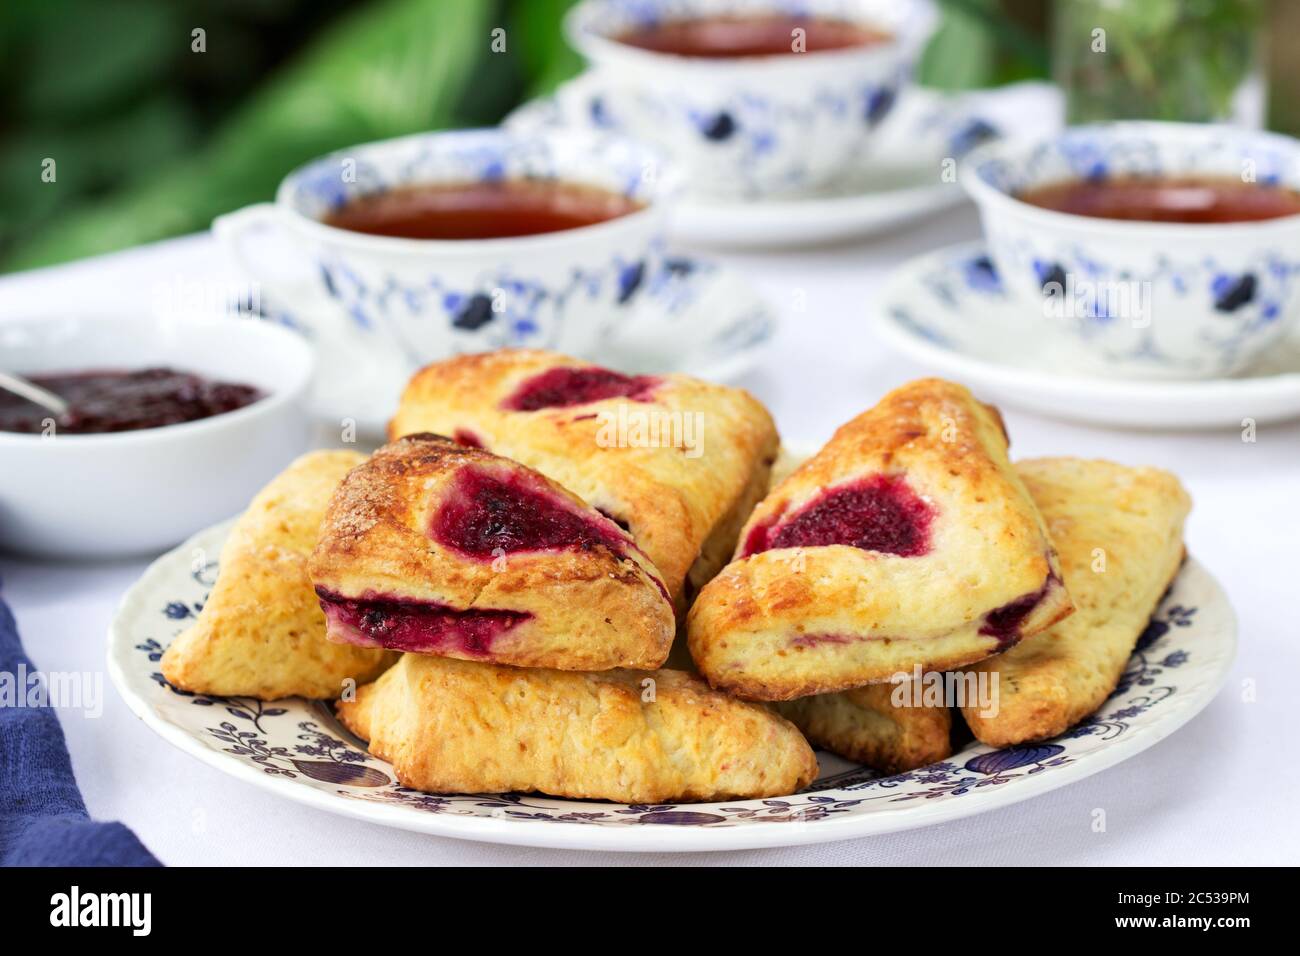 Afternoon tea in the garden with scones, strawberry jam, finger sandwiches with cucumber and egg salad. Stock Photo